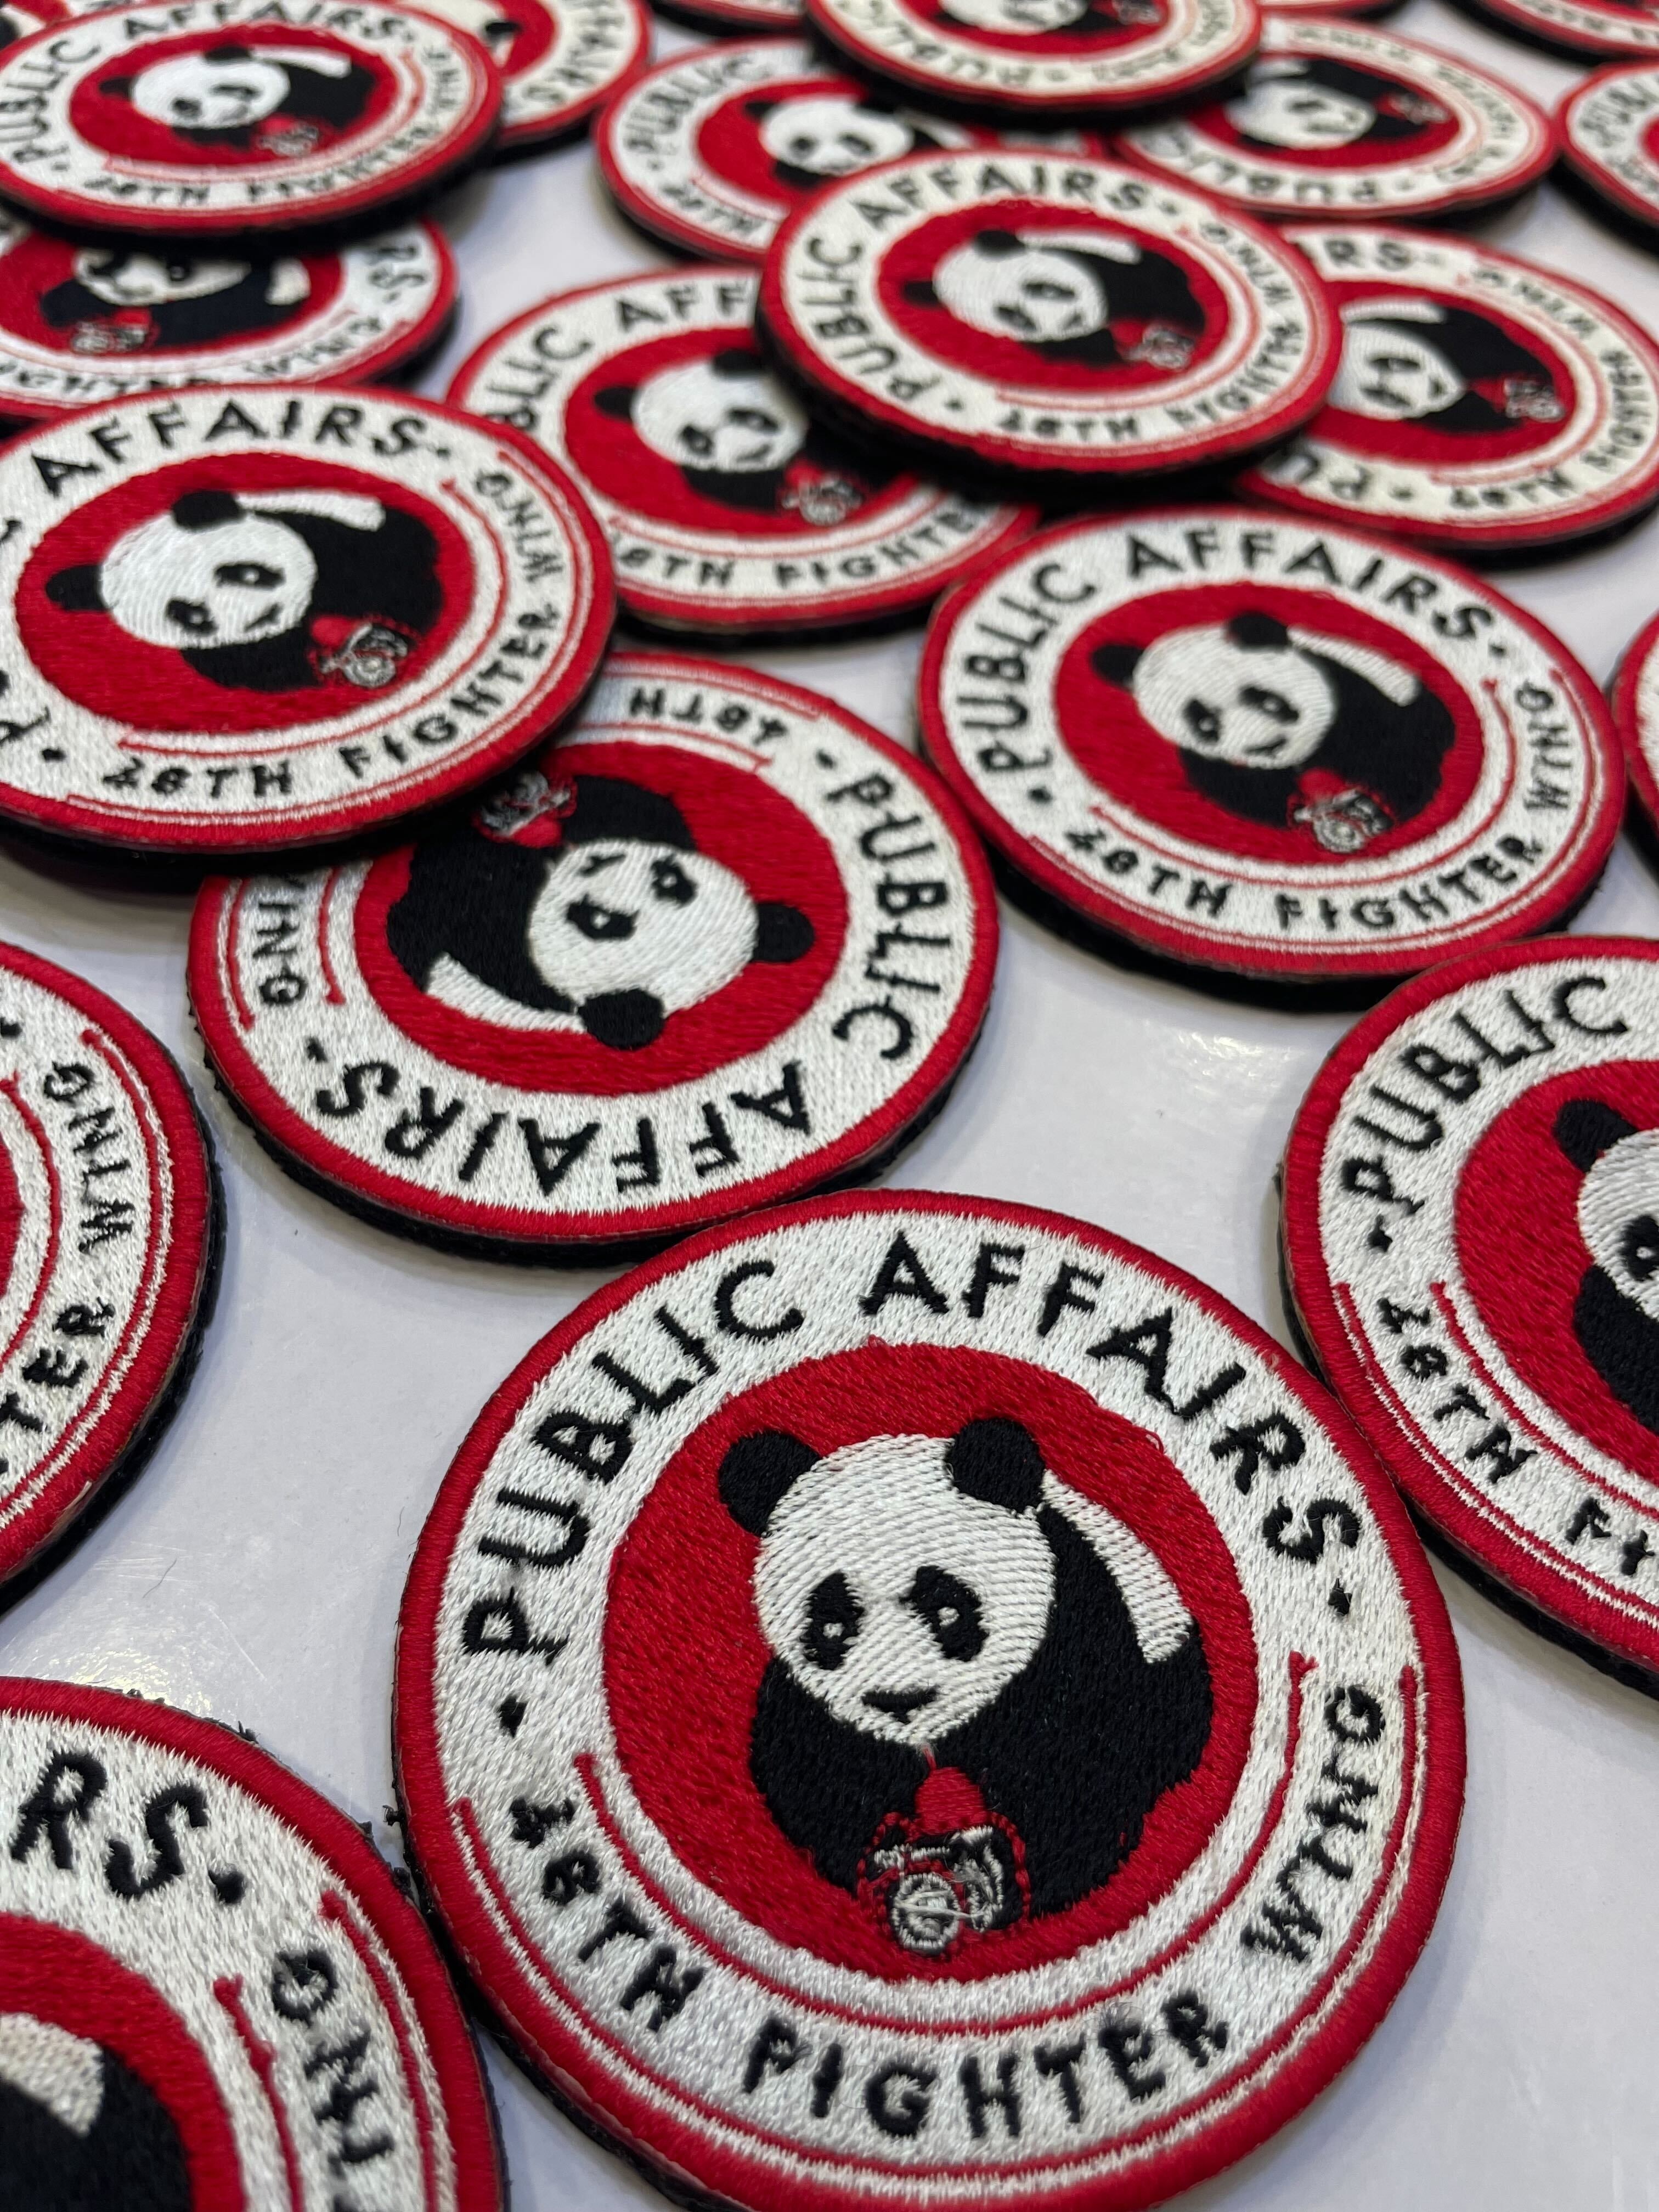 Buy Premium Quality Custom Embroidered Patches